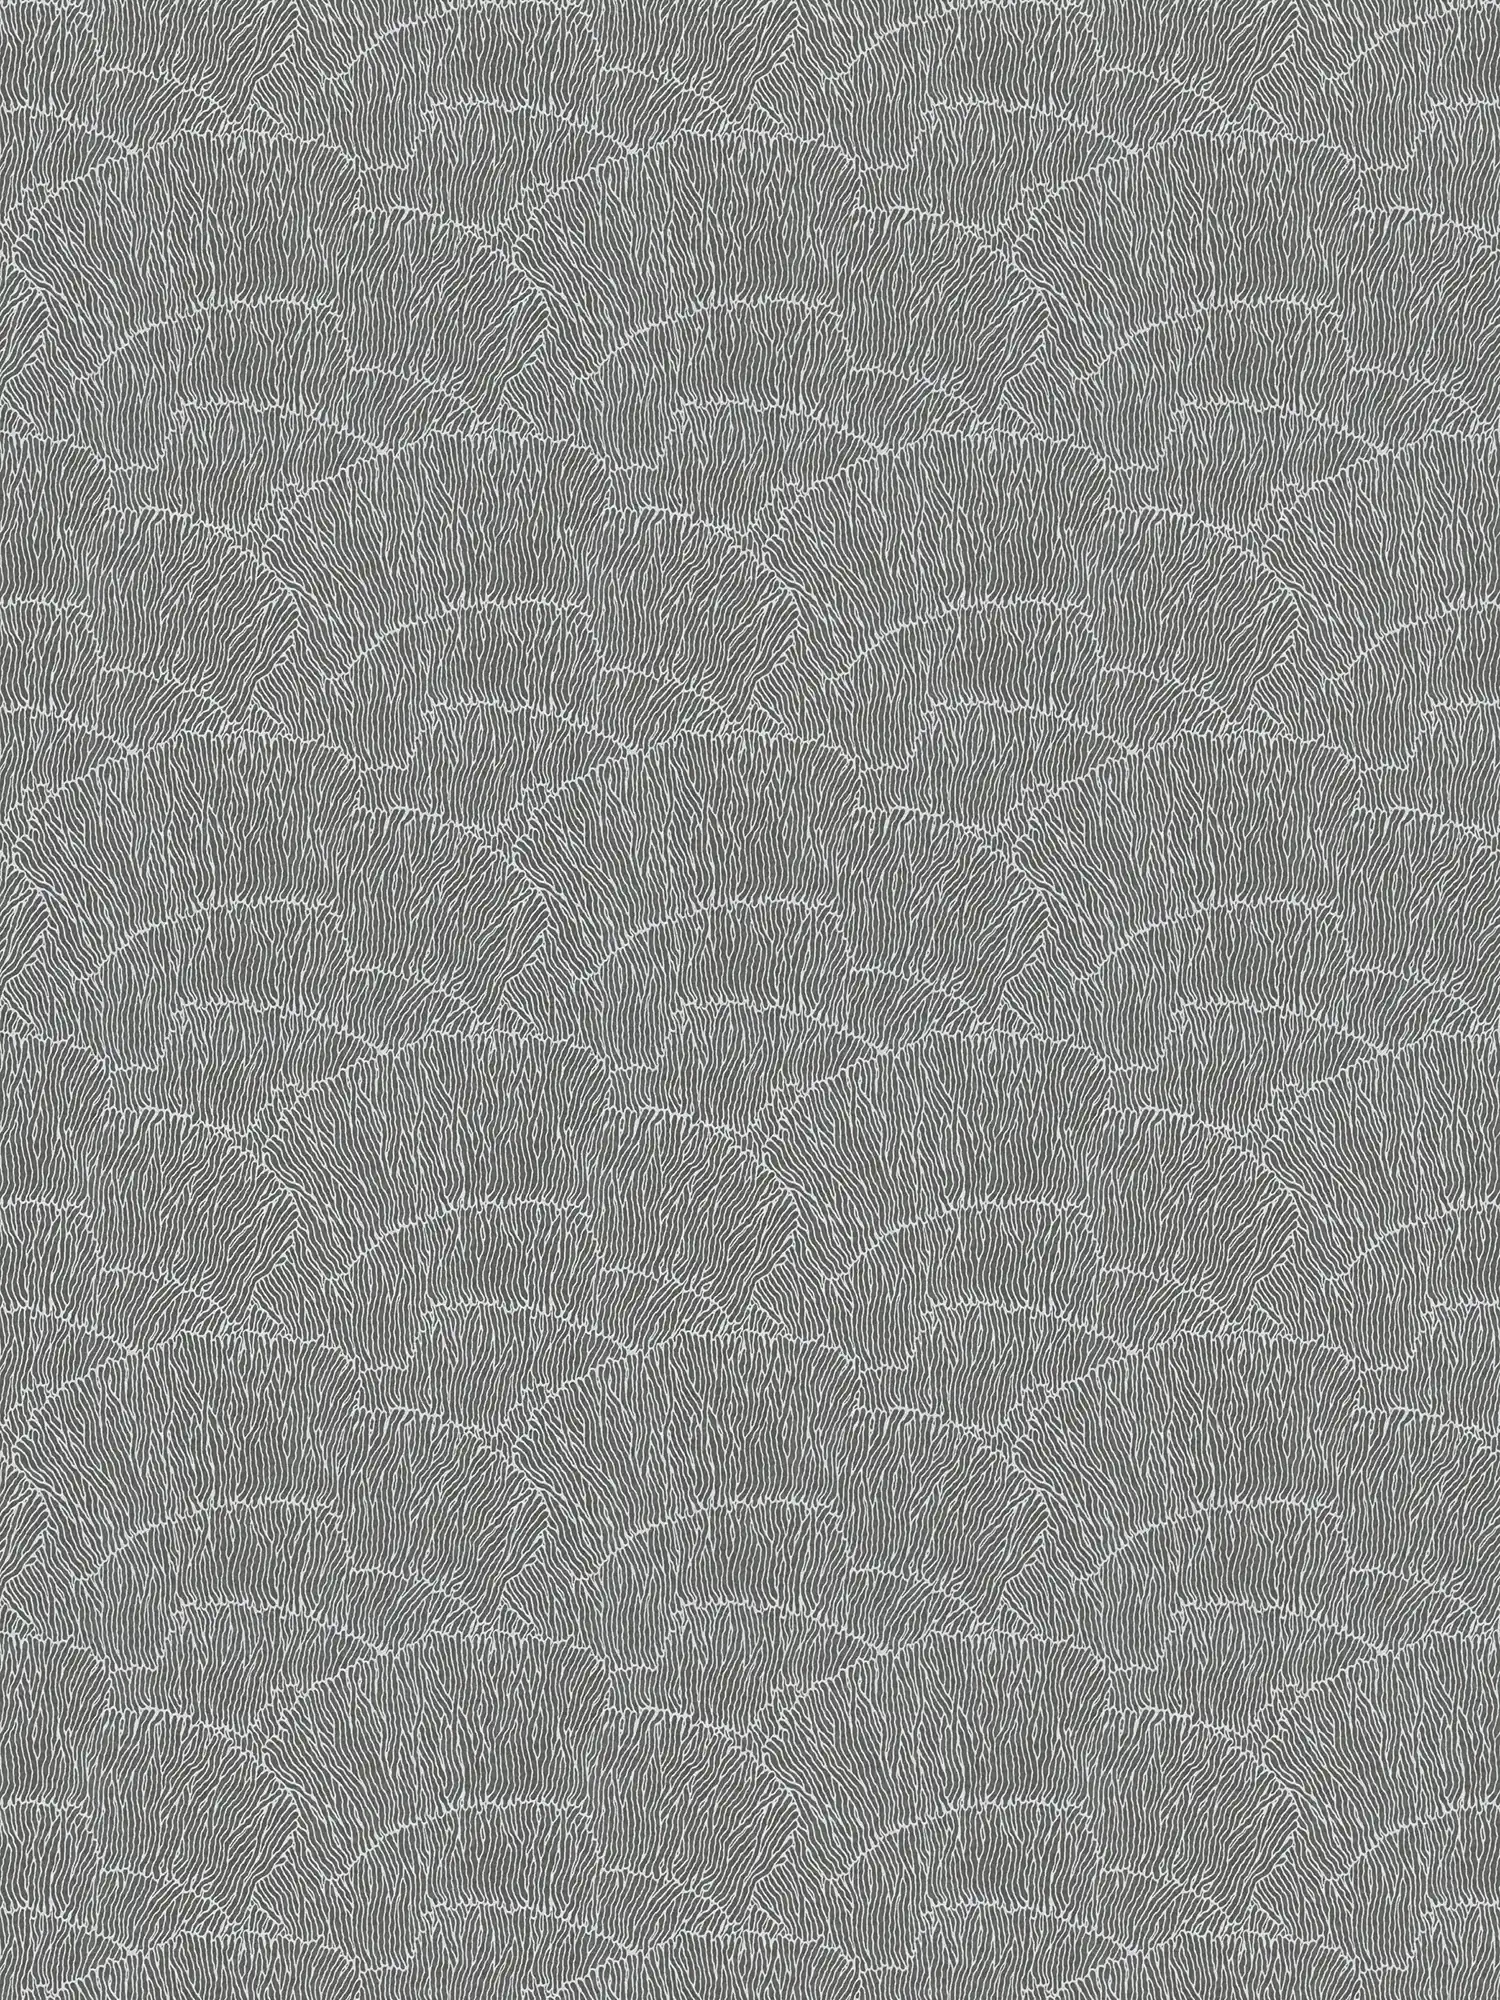 Abstract Wallpaper With Line Pattern - Silver, Black, Metallic
